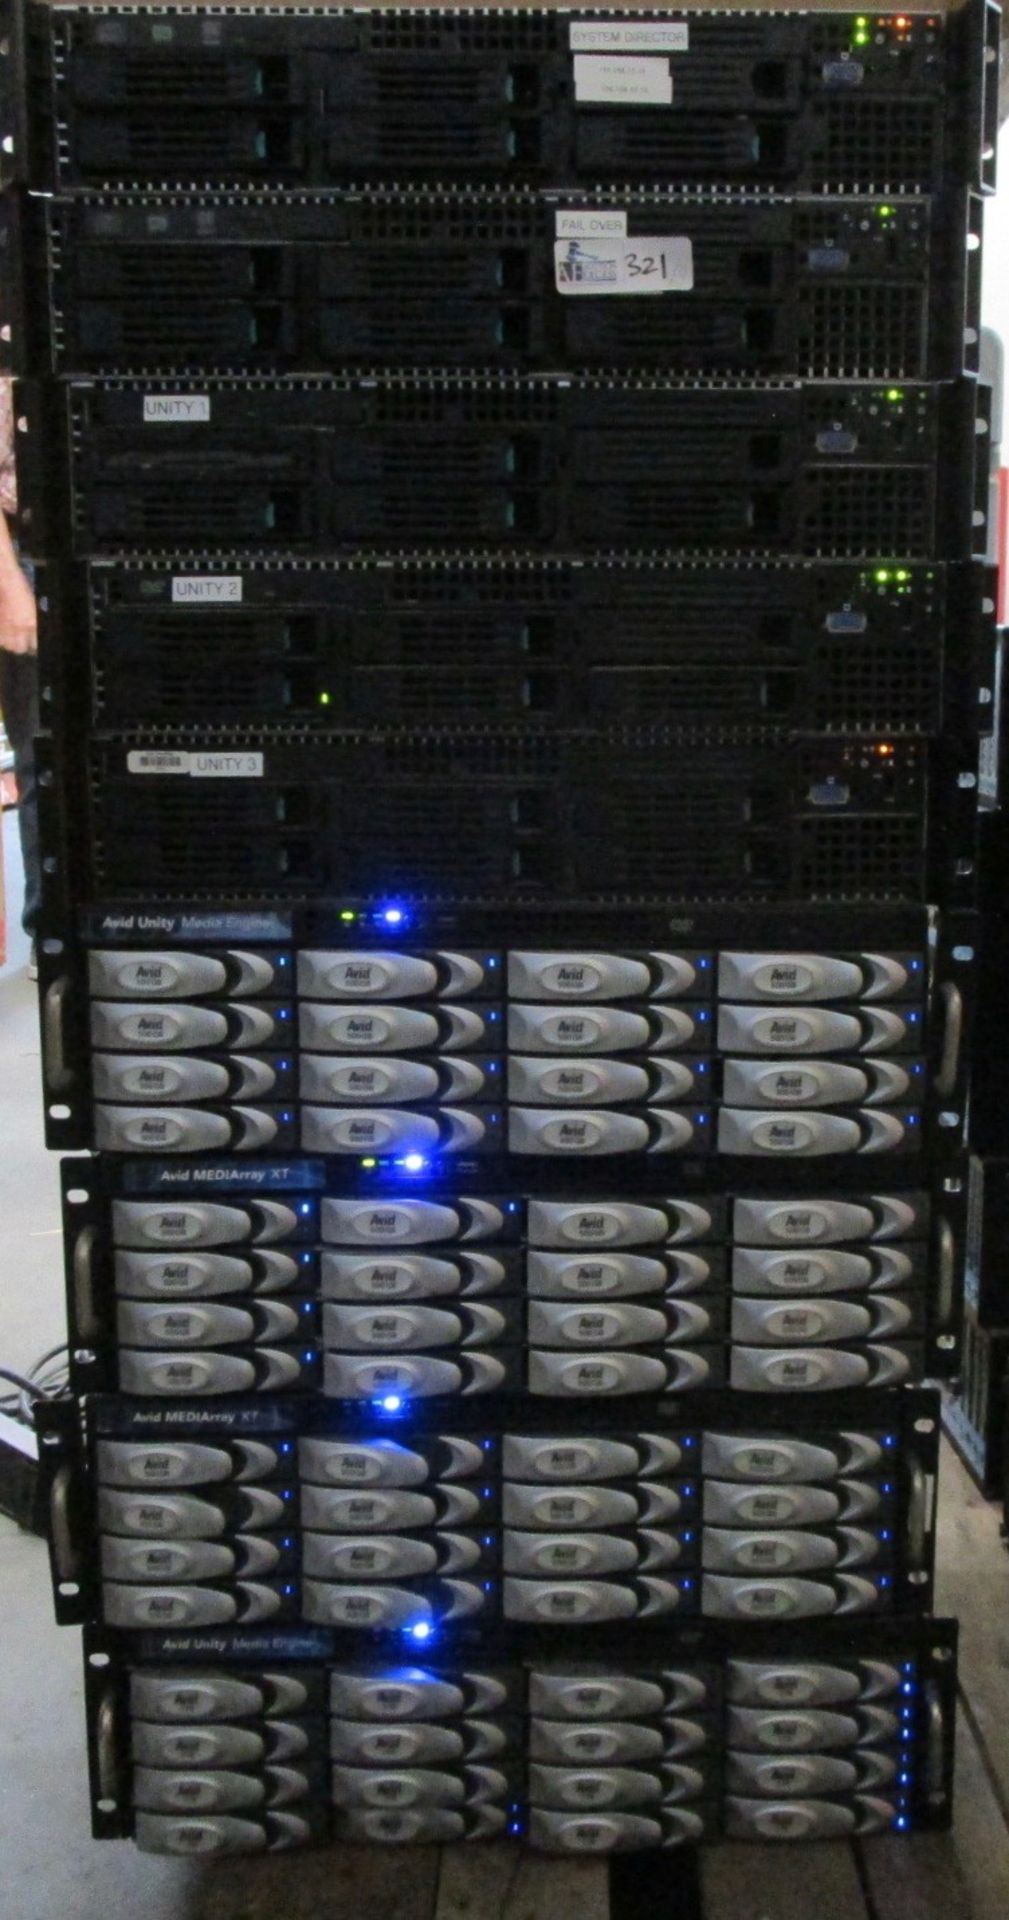 LOT OF 9 RAIDS/SERVERS WITH APPX 72 HARD DRIVES